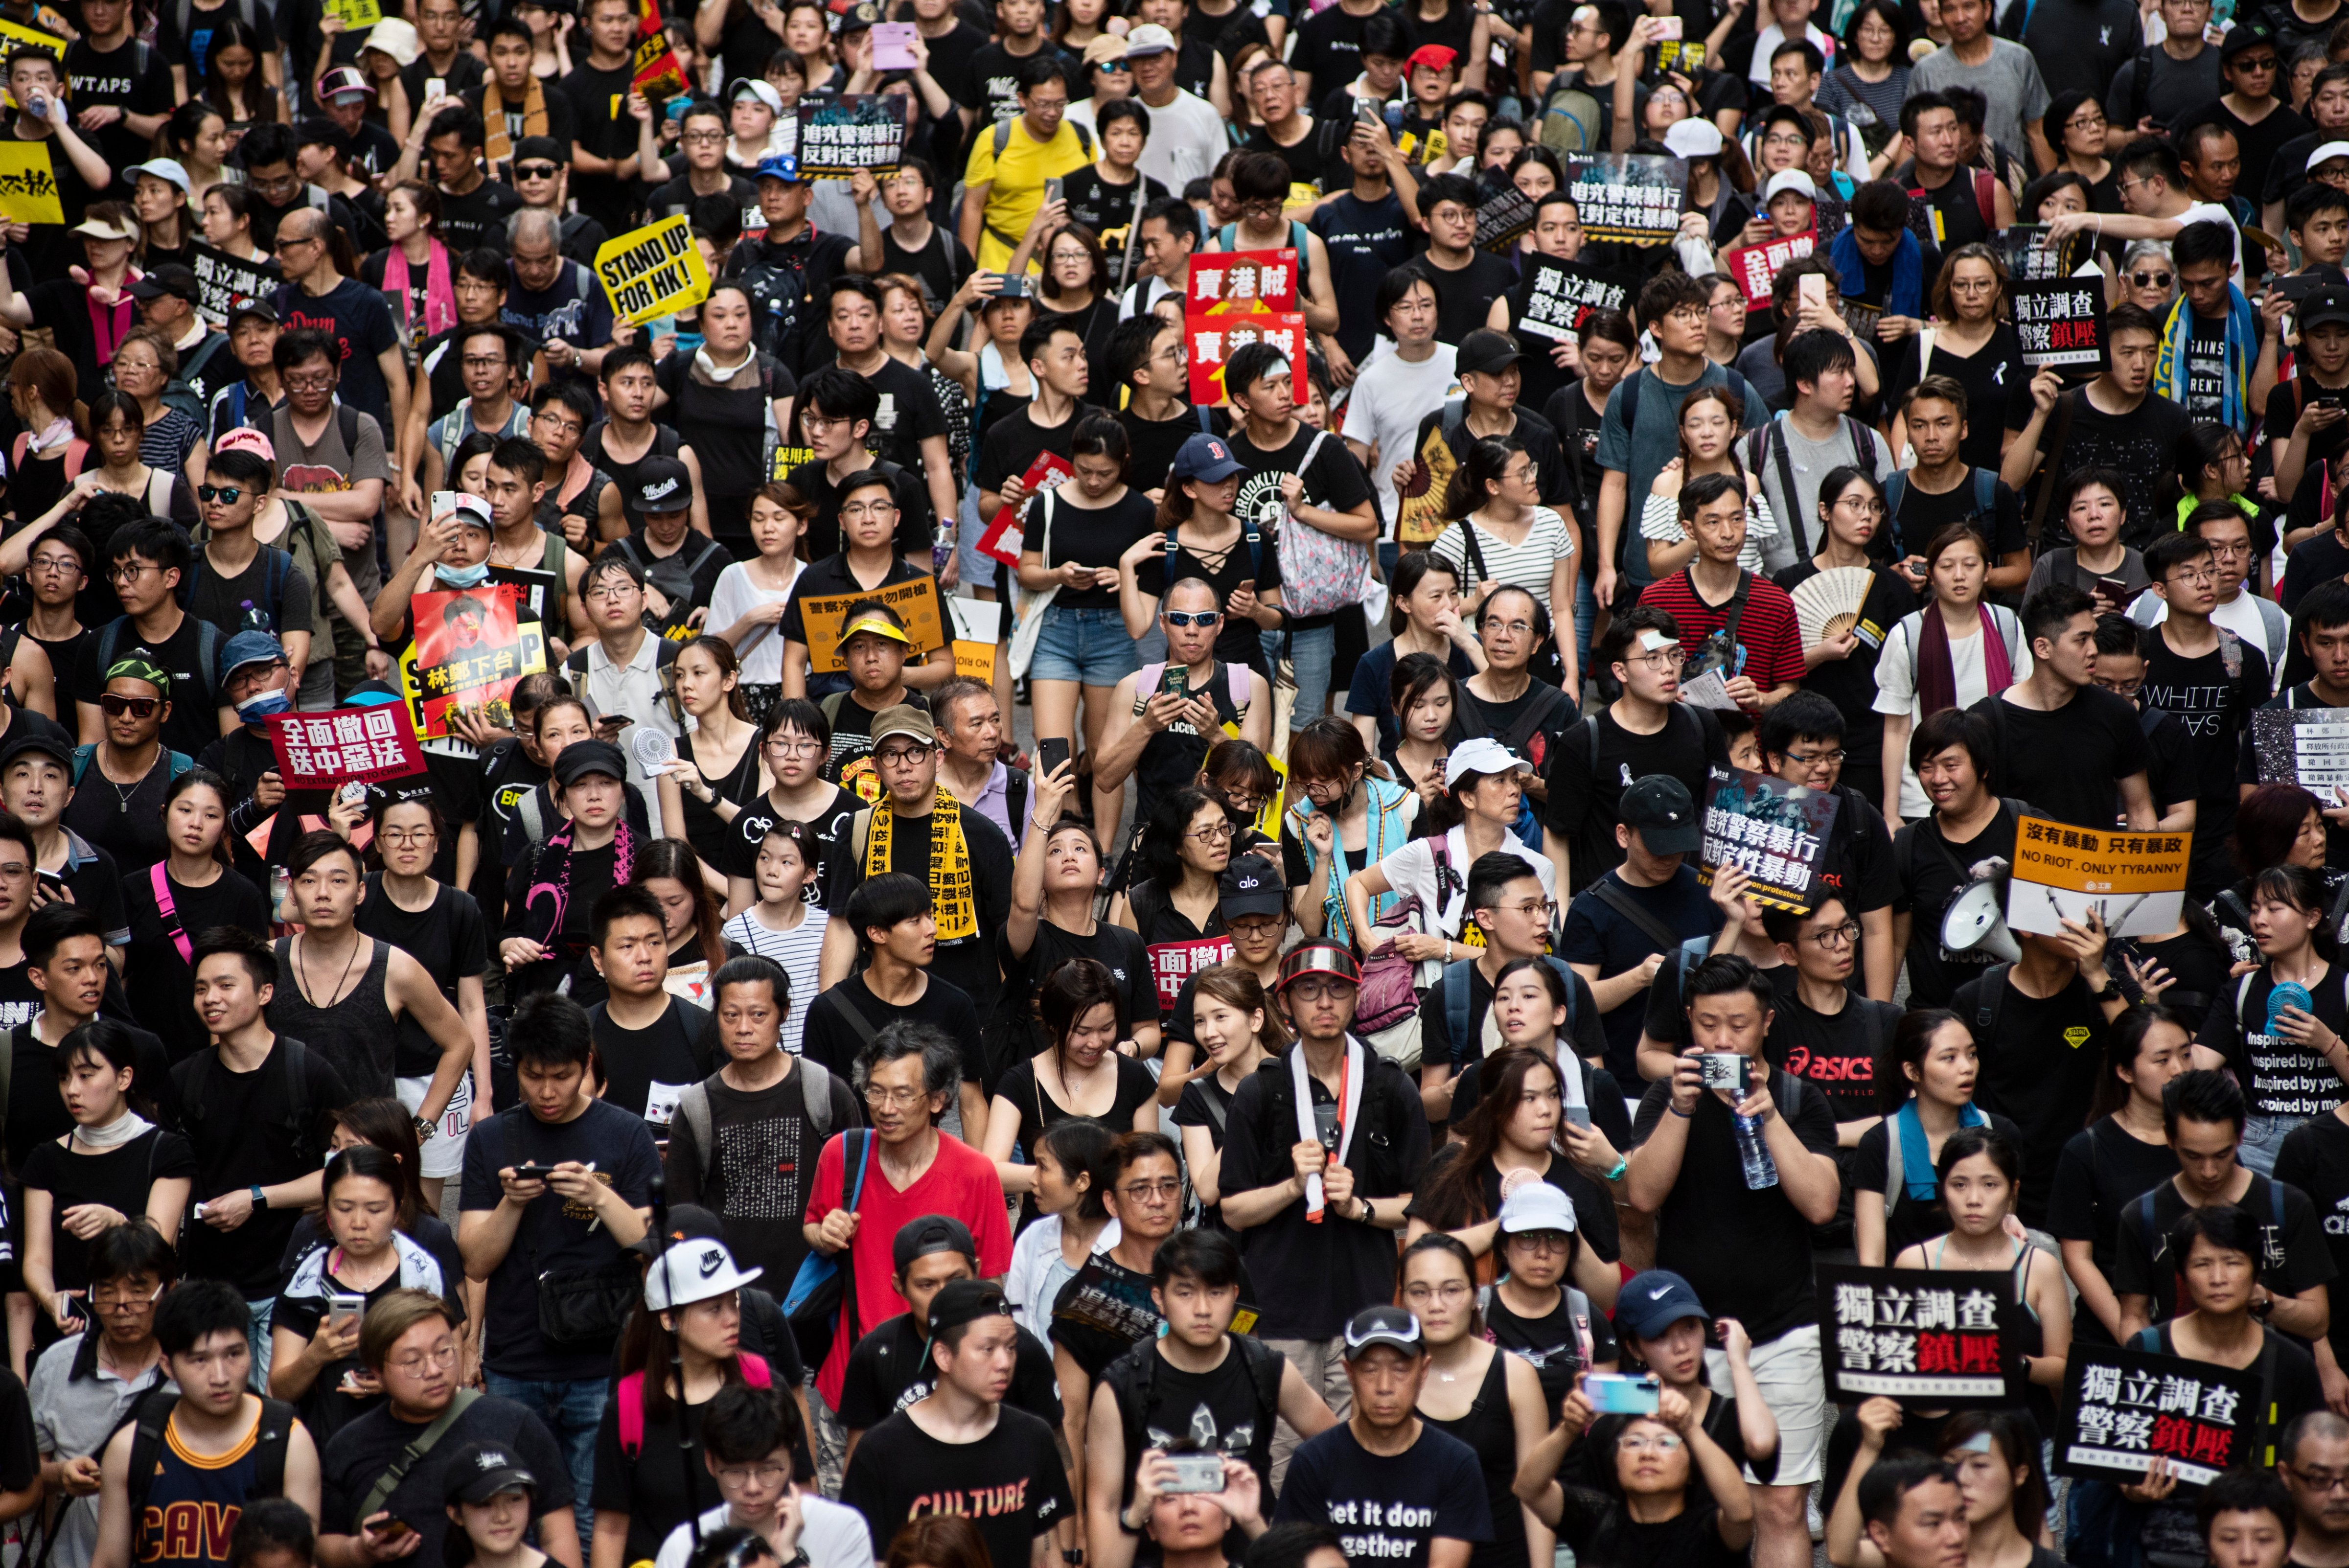 Demonstrators in Hong Kong hold anti-government placards and chant slogans during a march on July 1, 2019. (Miguel Candela/SOPA Images/LightRocket via Getty Images)